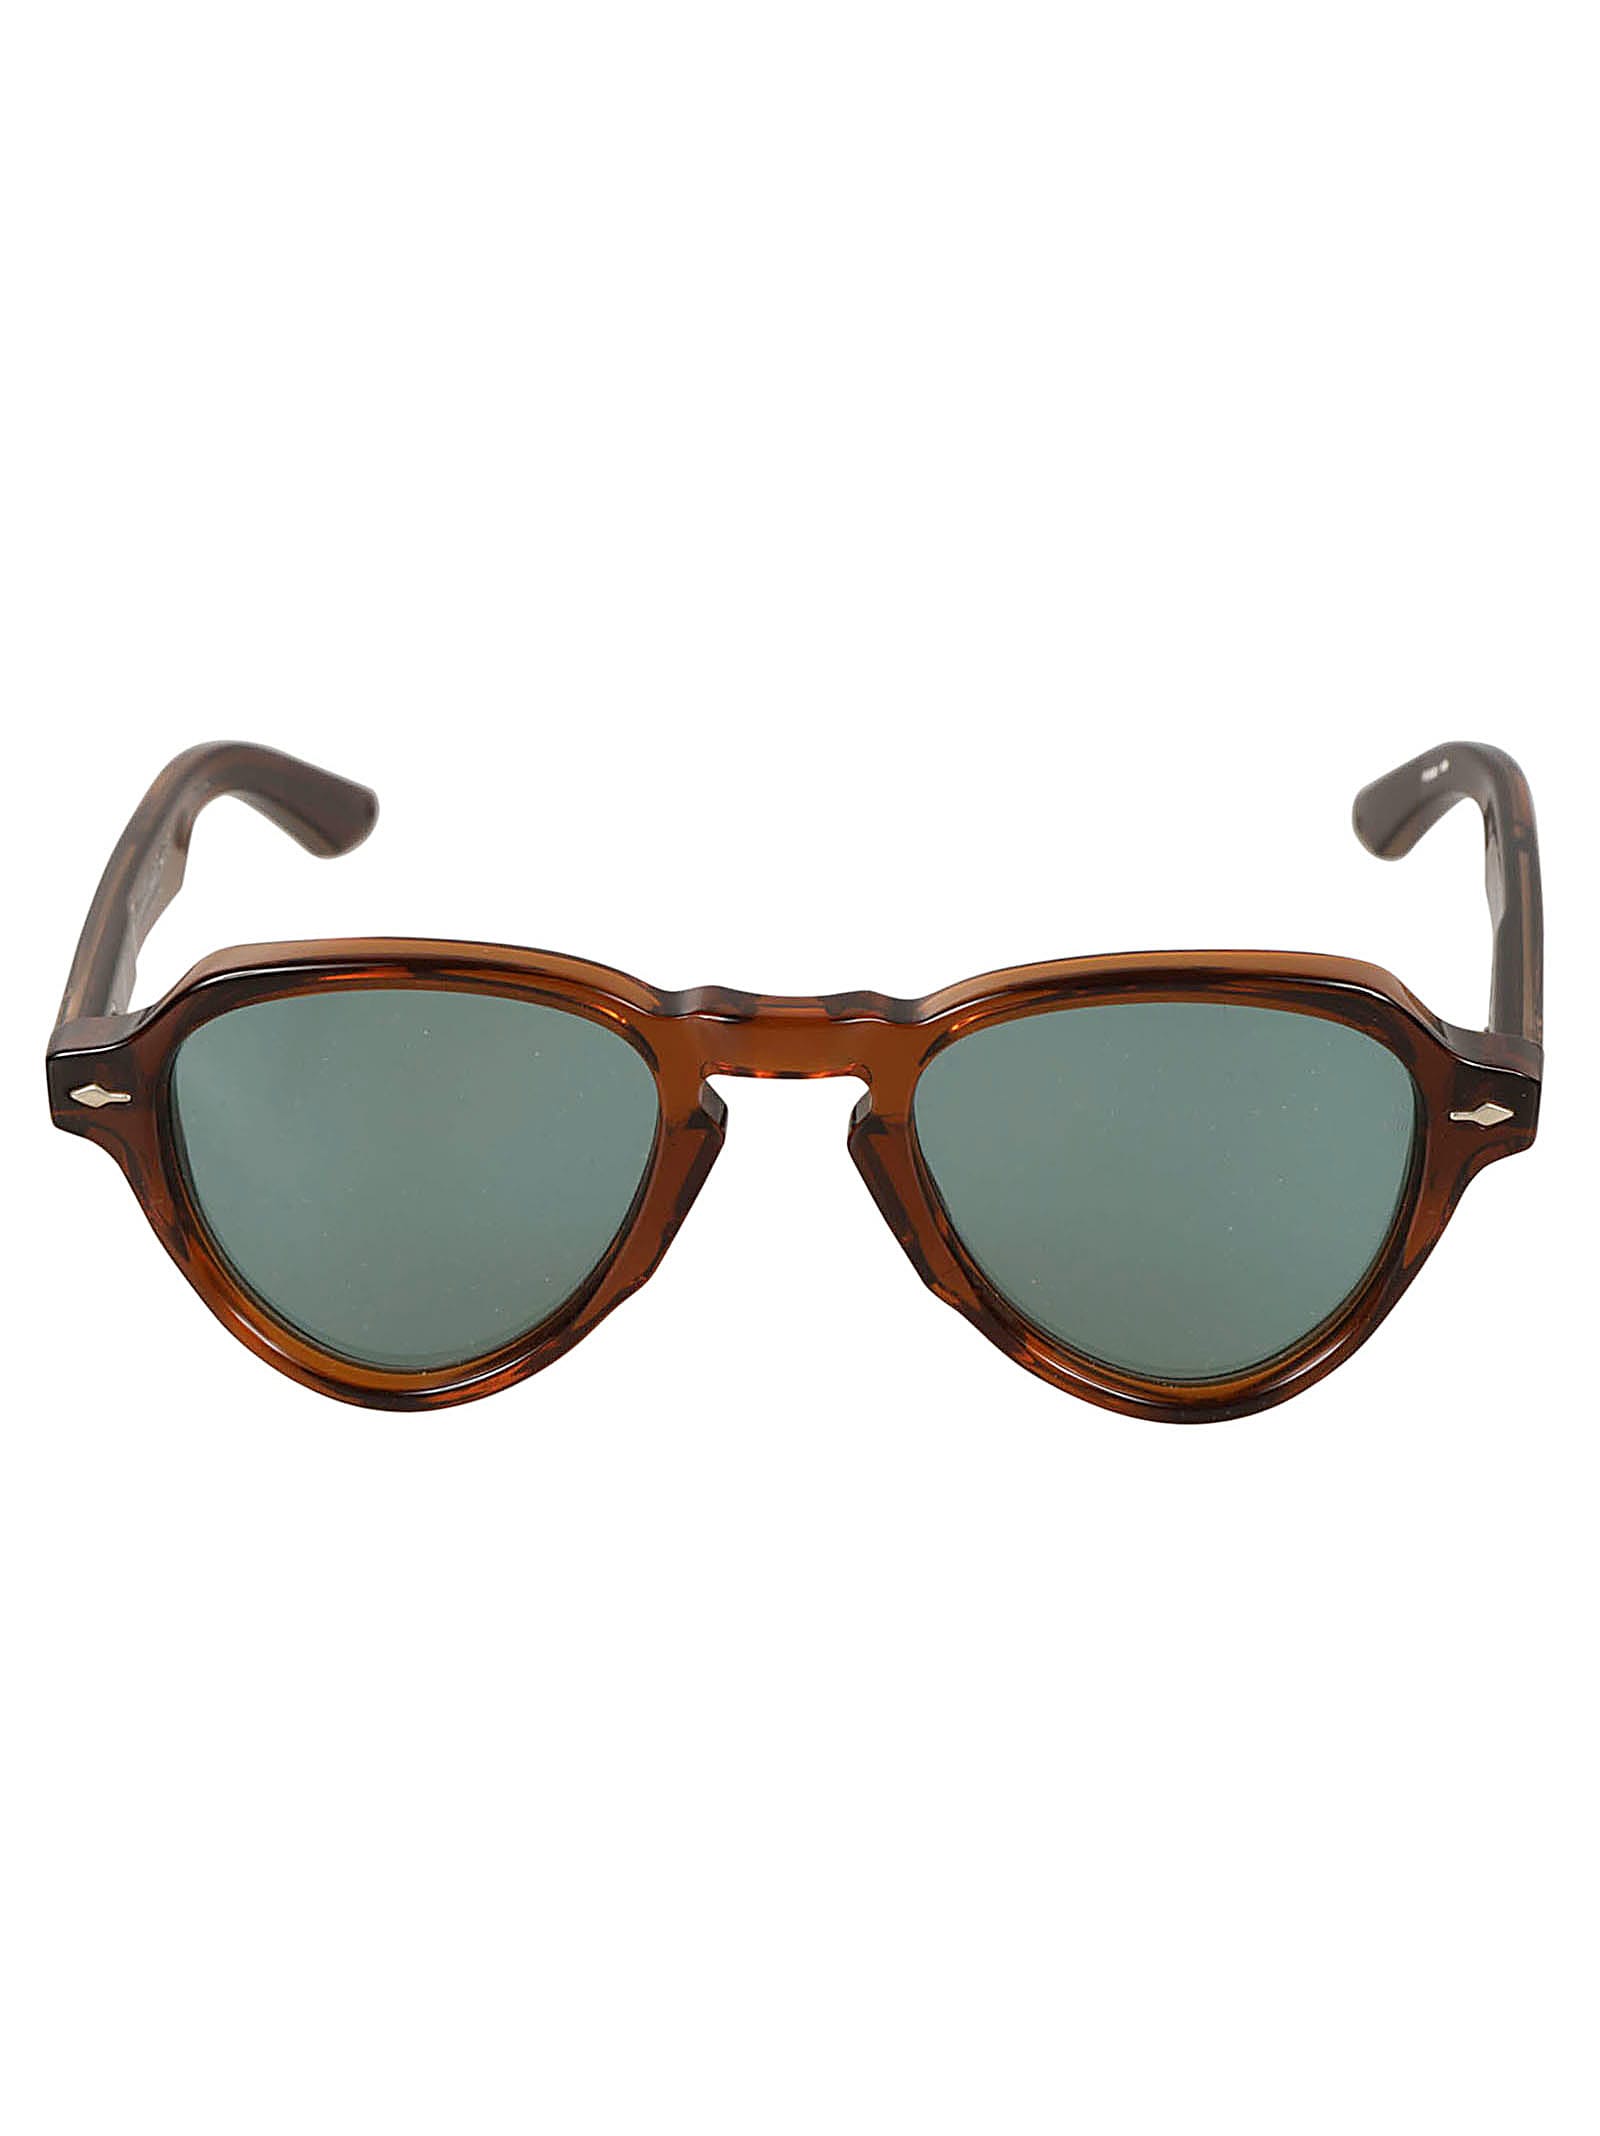 jacques marie mage hickory sunglasses sunglasses